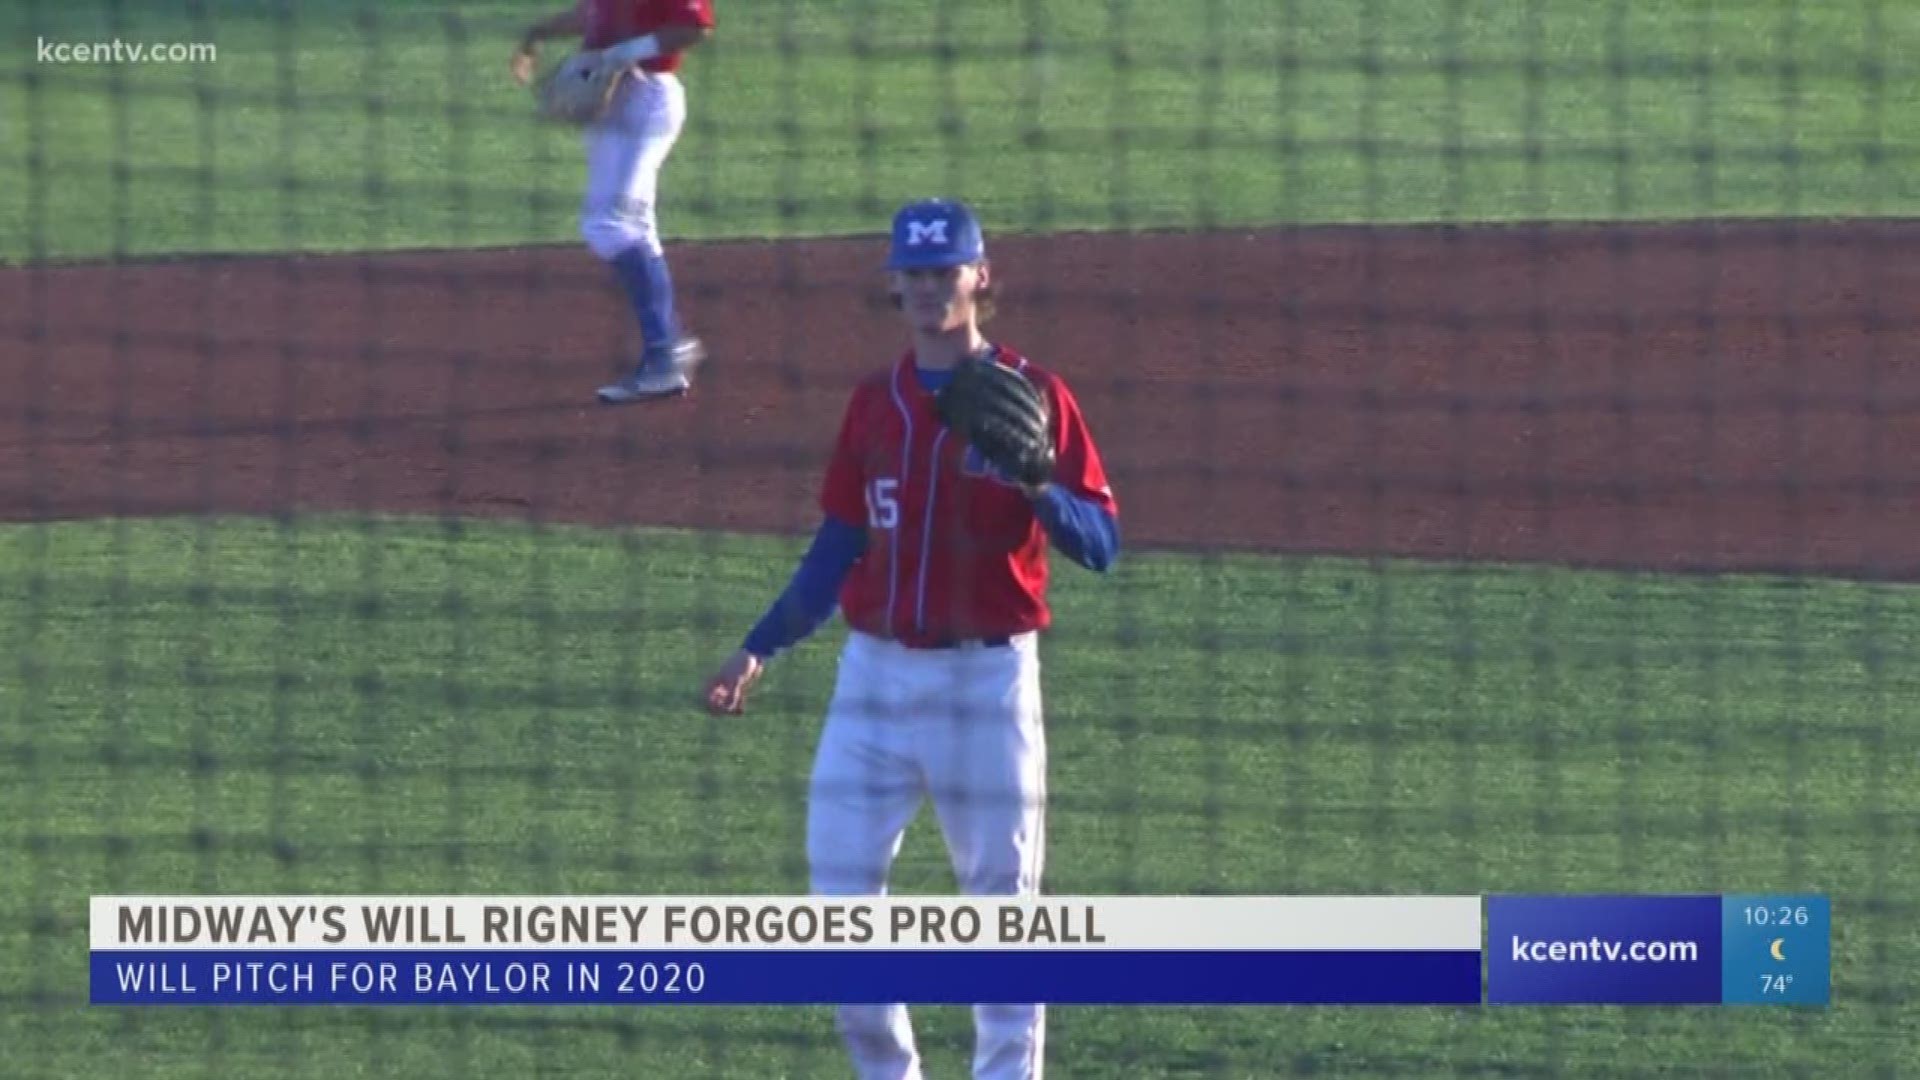 Will Rigney was selected in the MLB Draft, but he decided to play at Baylor next season instead.